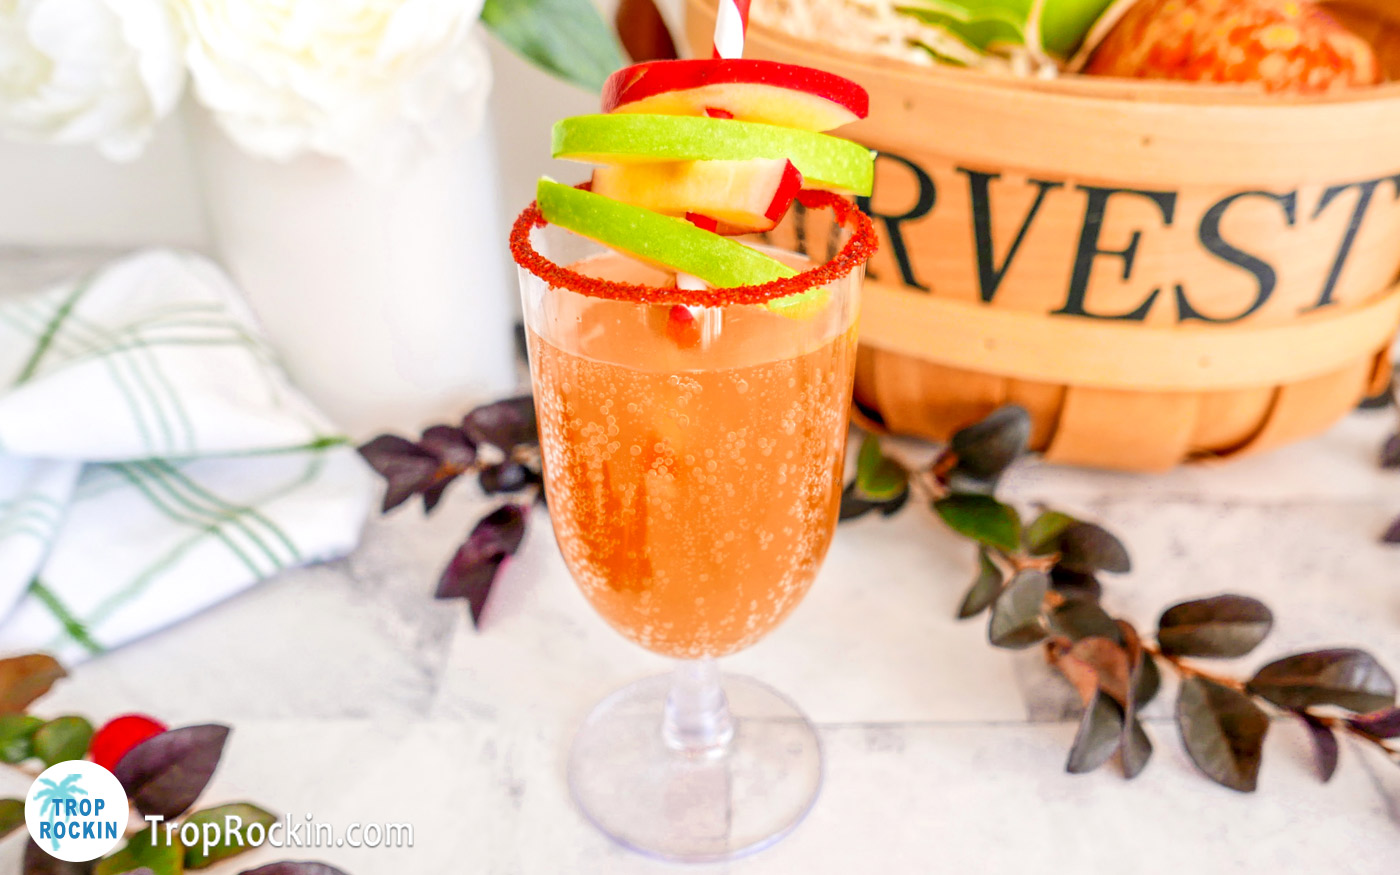 Caramel Apple Mimosa with red sugar rime and apple slices for garnish with a fall harvest decor in the background.